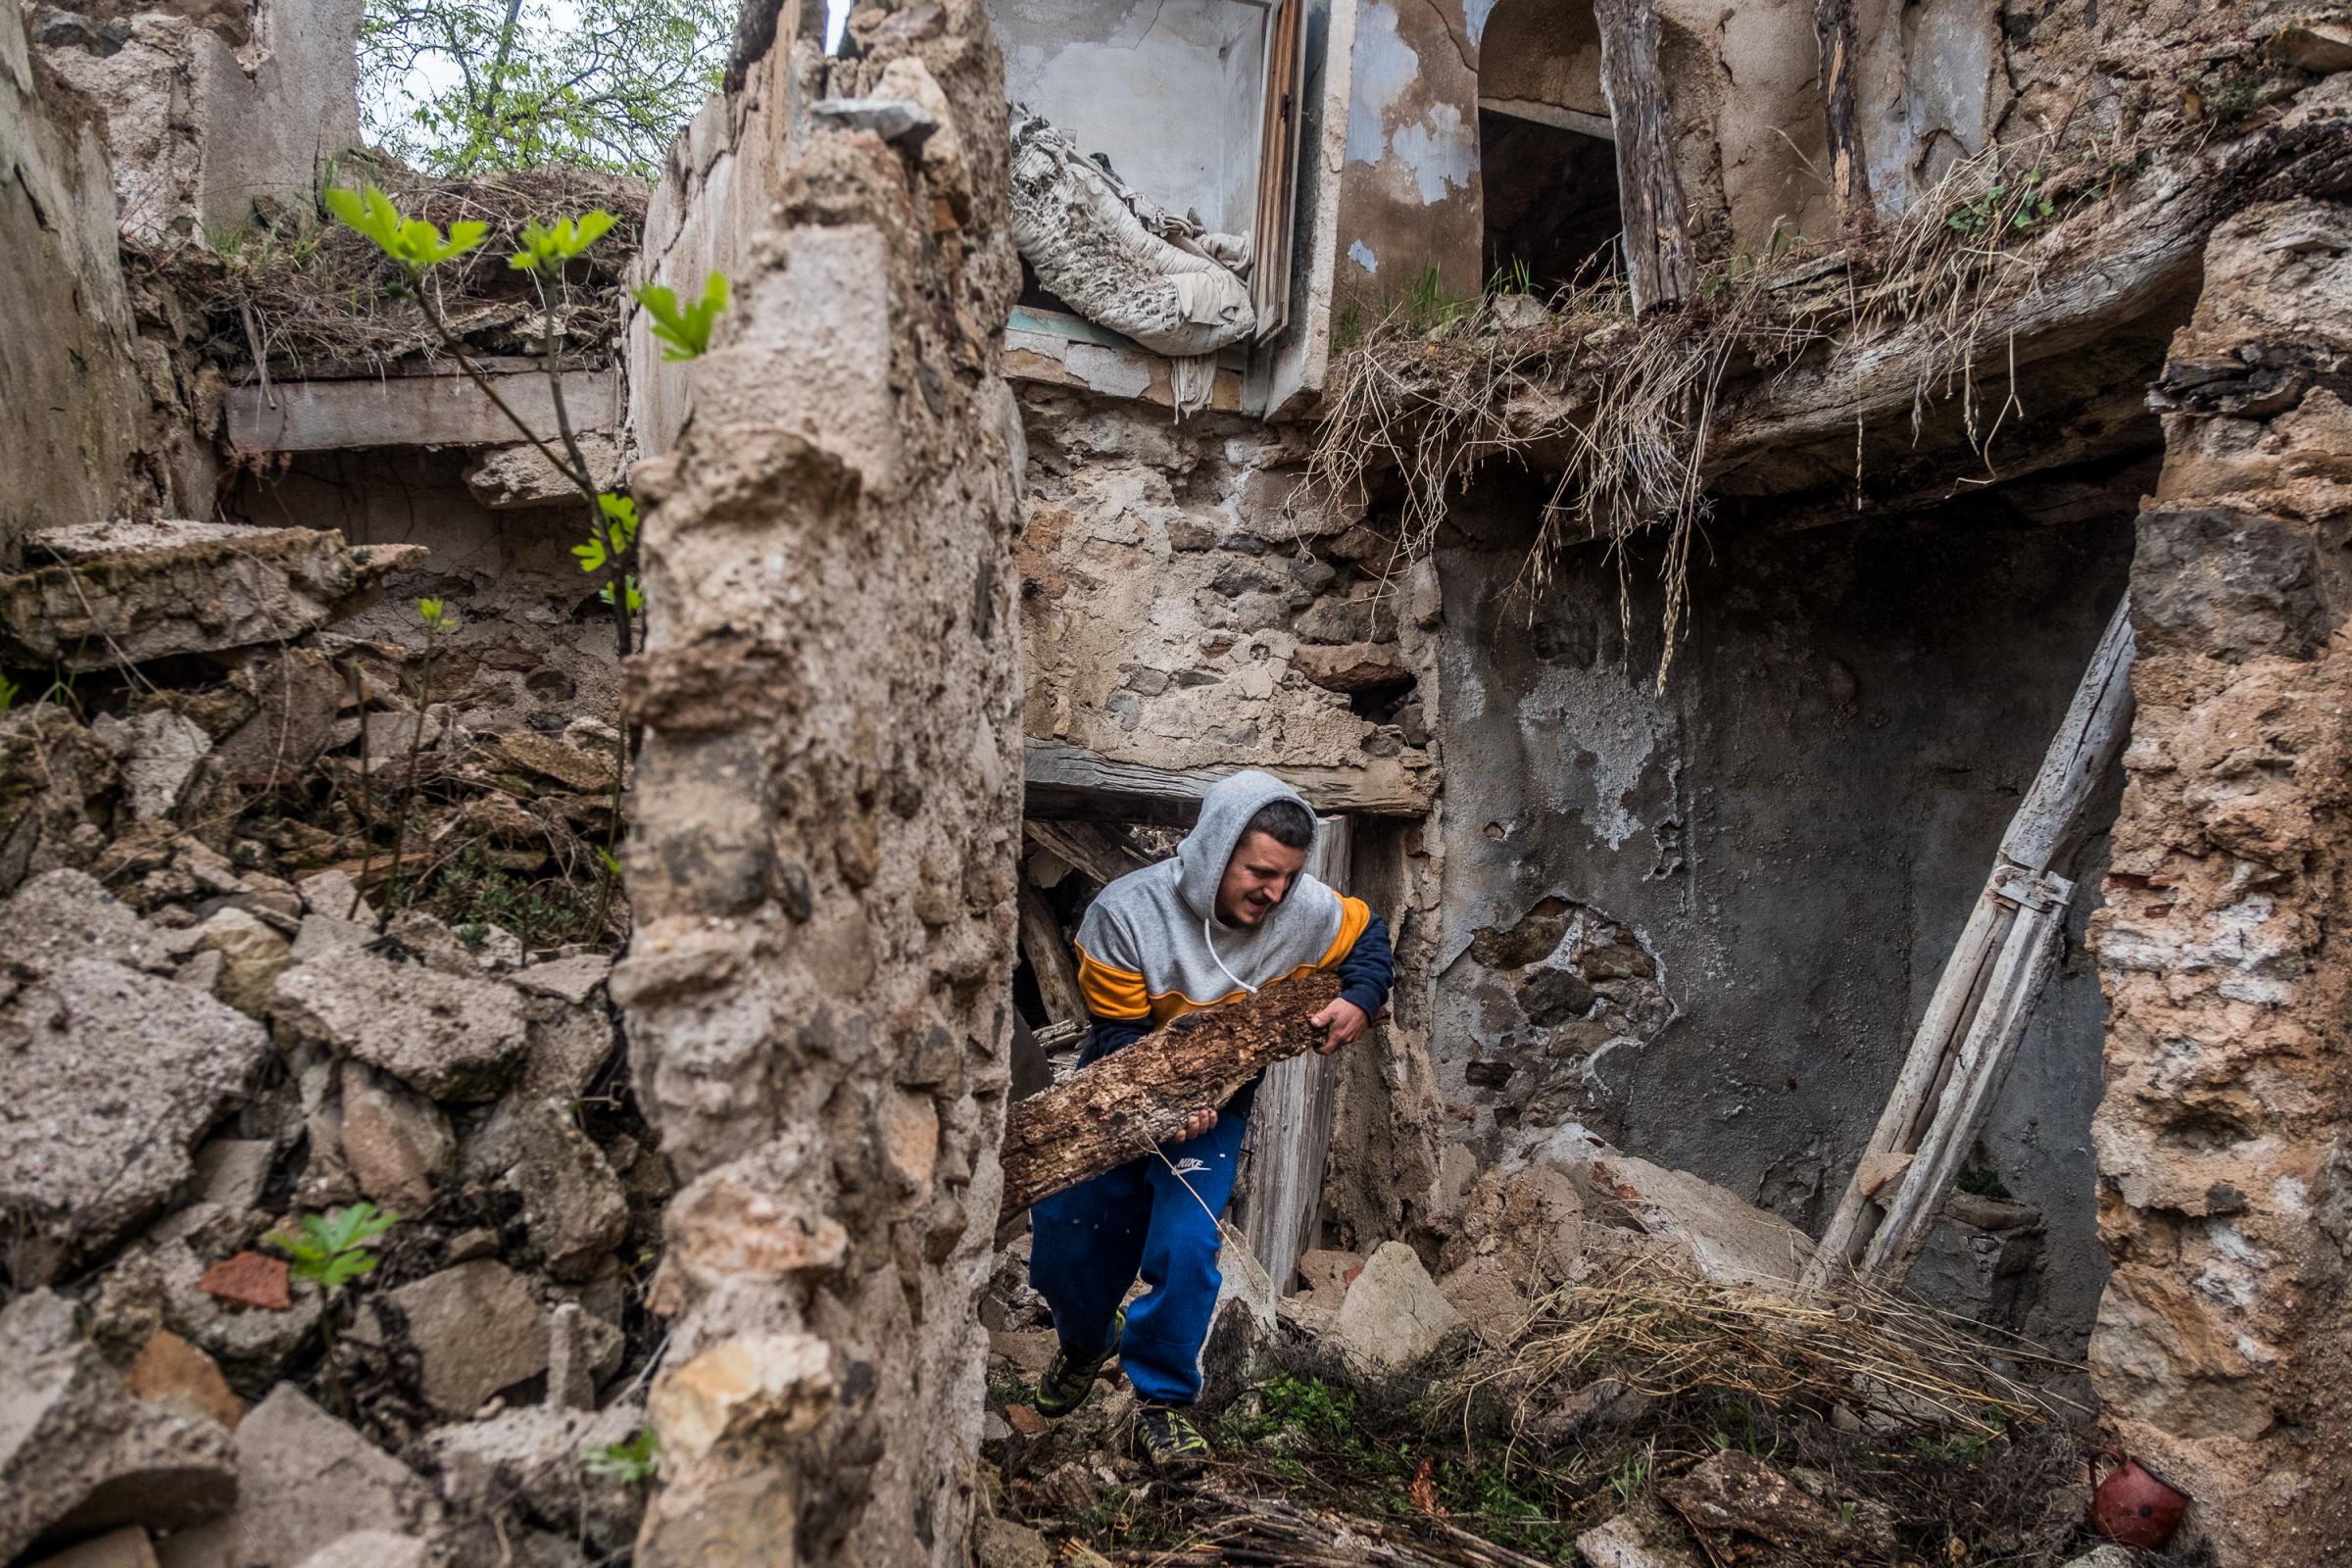 Guillem Mateu Prat bought a ruin in Aguinal&iacute;u for 1000 euros. He recycles the rubble on the ground to construct his house. &quot;In the city I get distracted. In the rural areas I reconnect to the essence of life.&quot; Aguinal&iacute;u, 11-4-2021